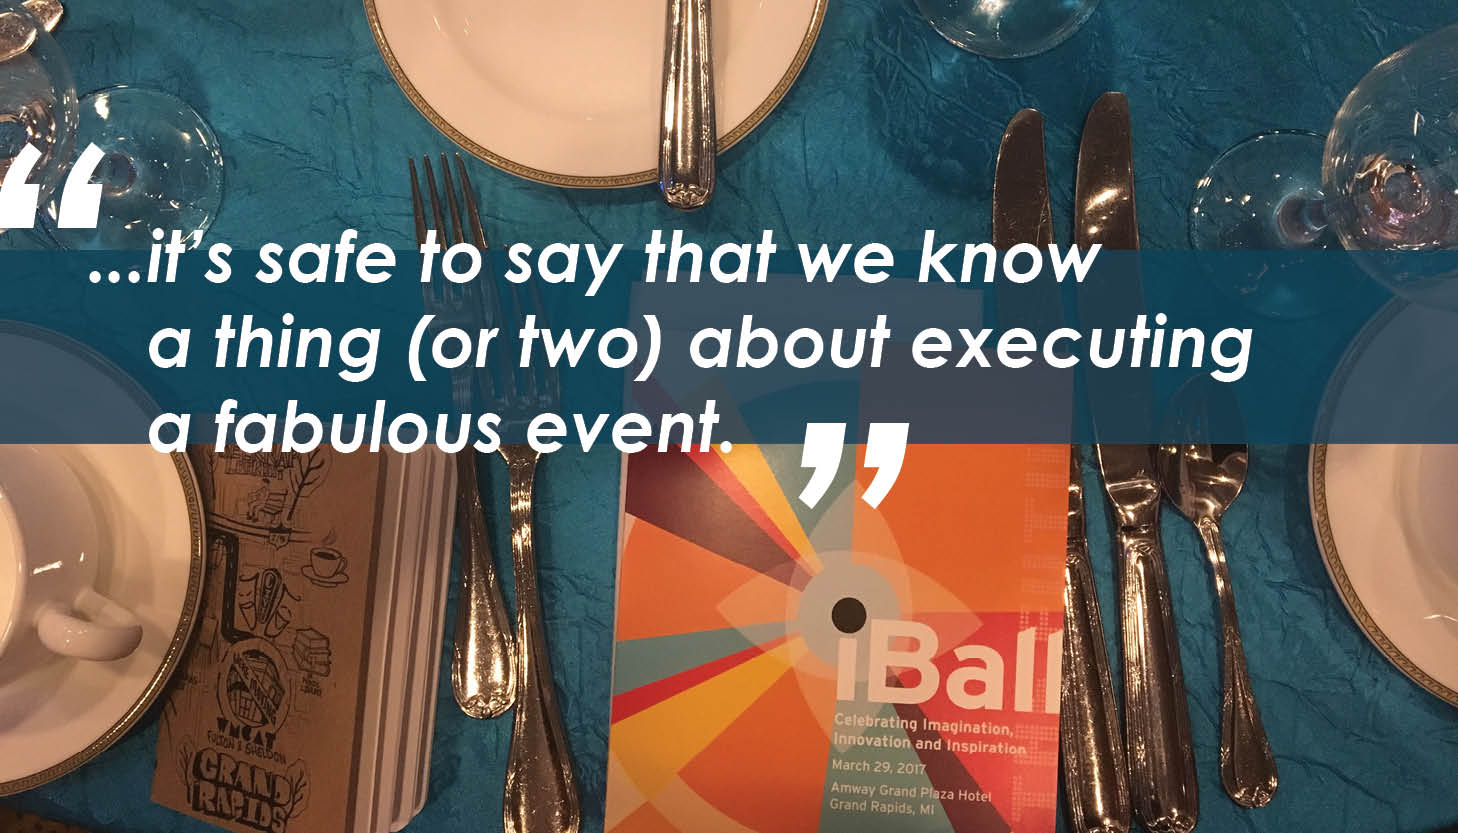 A spread at the #iBall 2017 features white text reading, "...it's safe to say that we know a thing (or two) about executing a fabulous event."